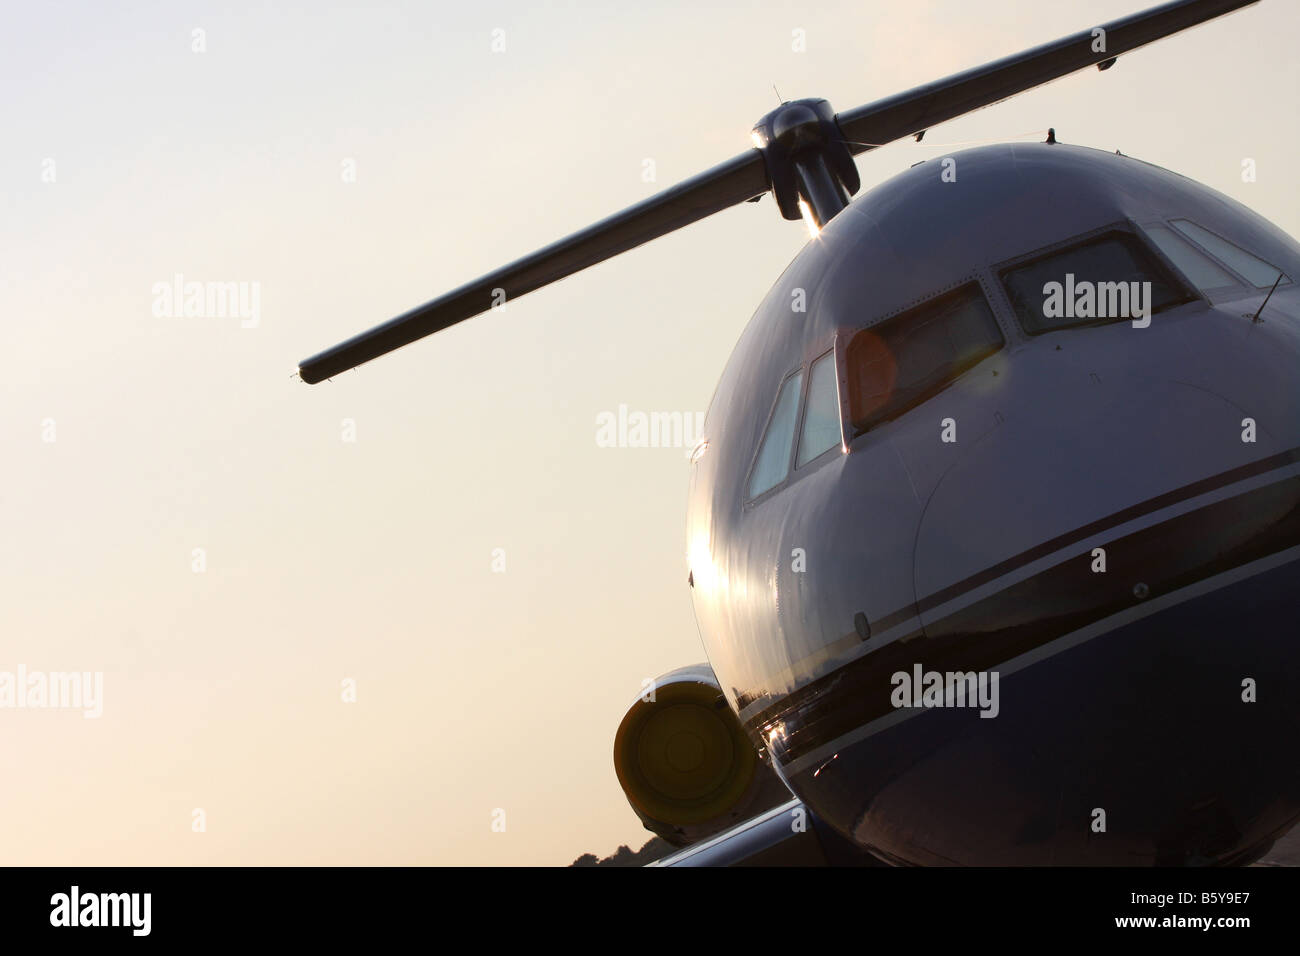 An airplane at an airport Stock Photo